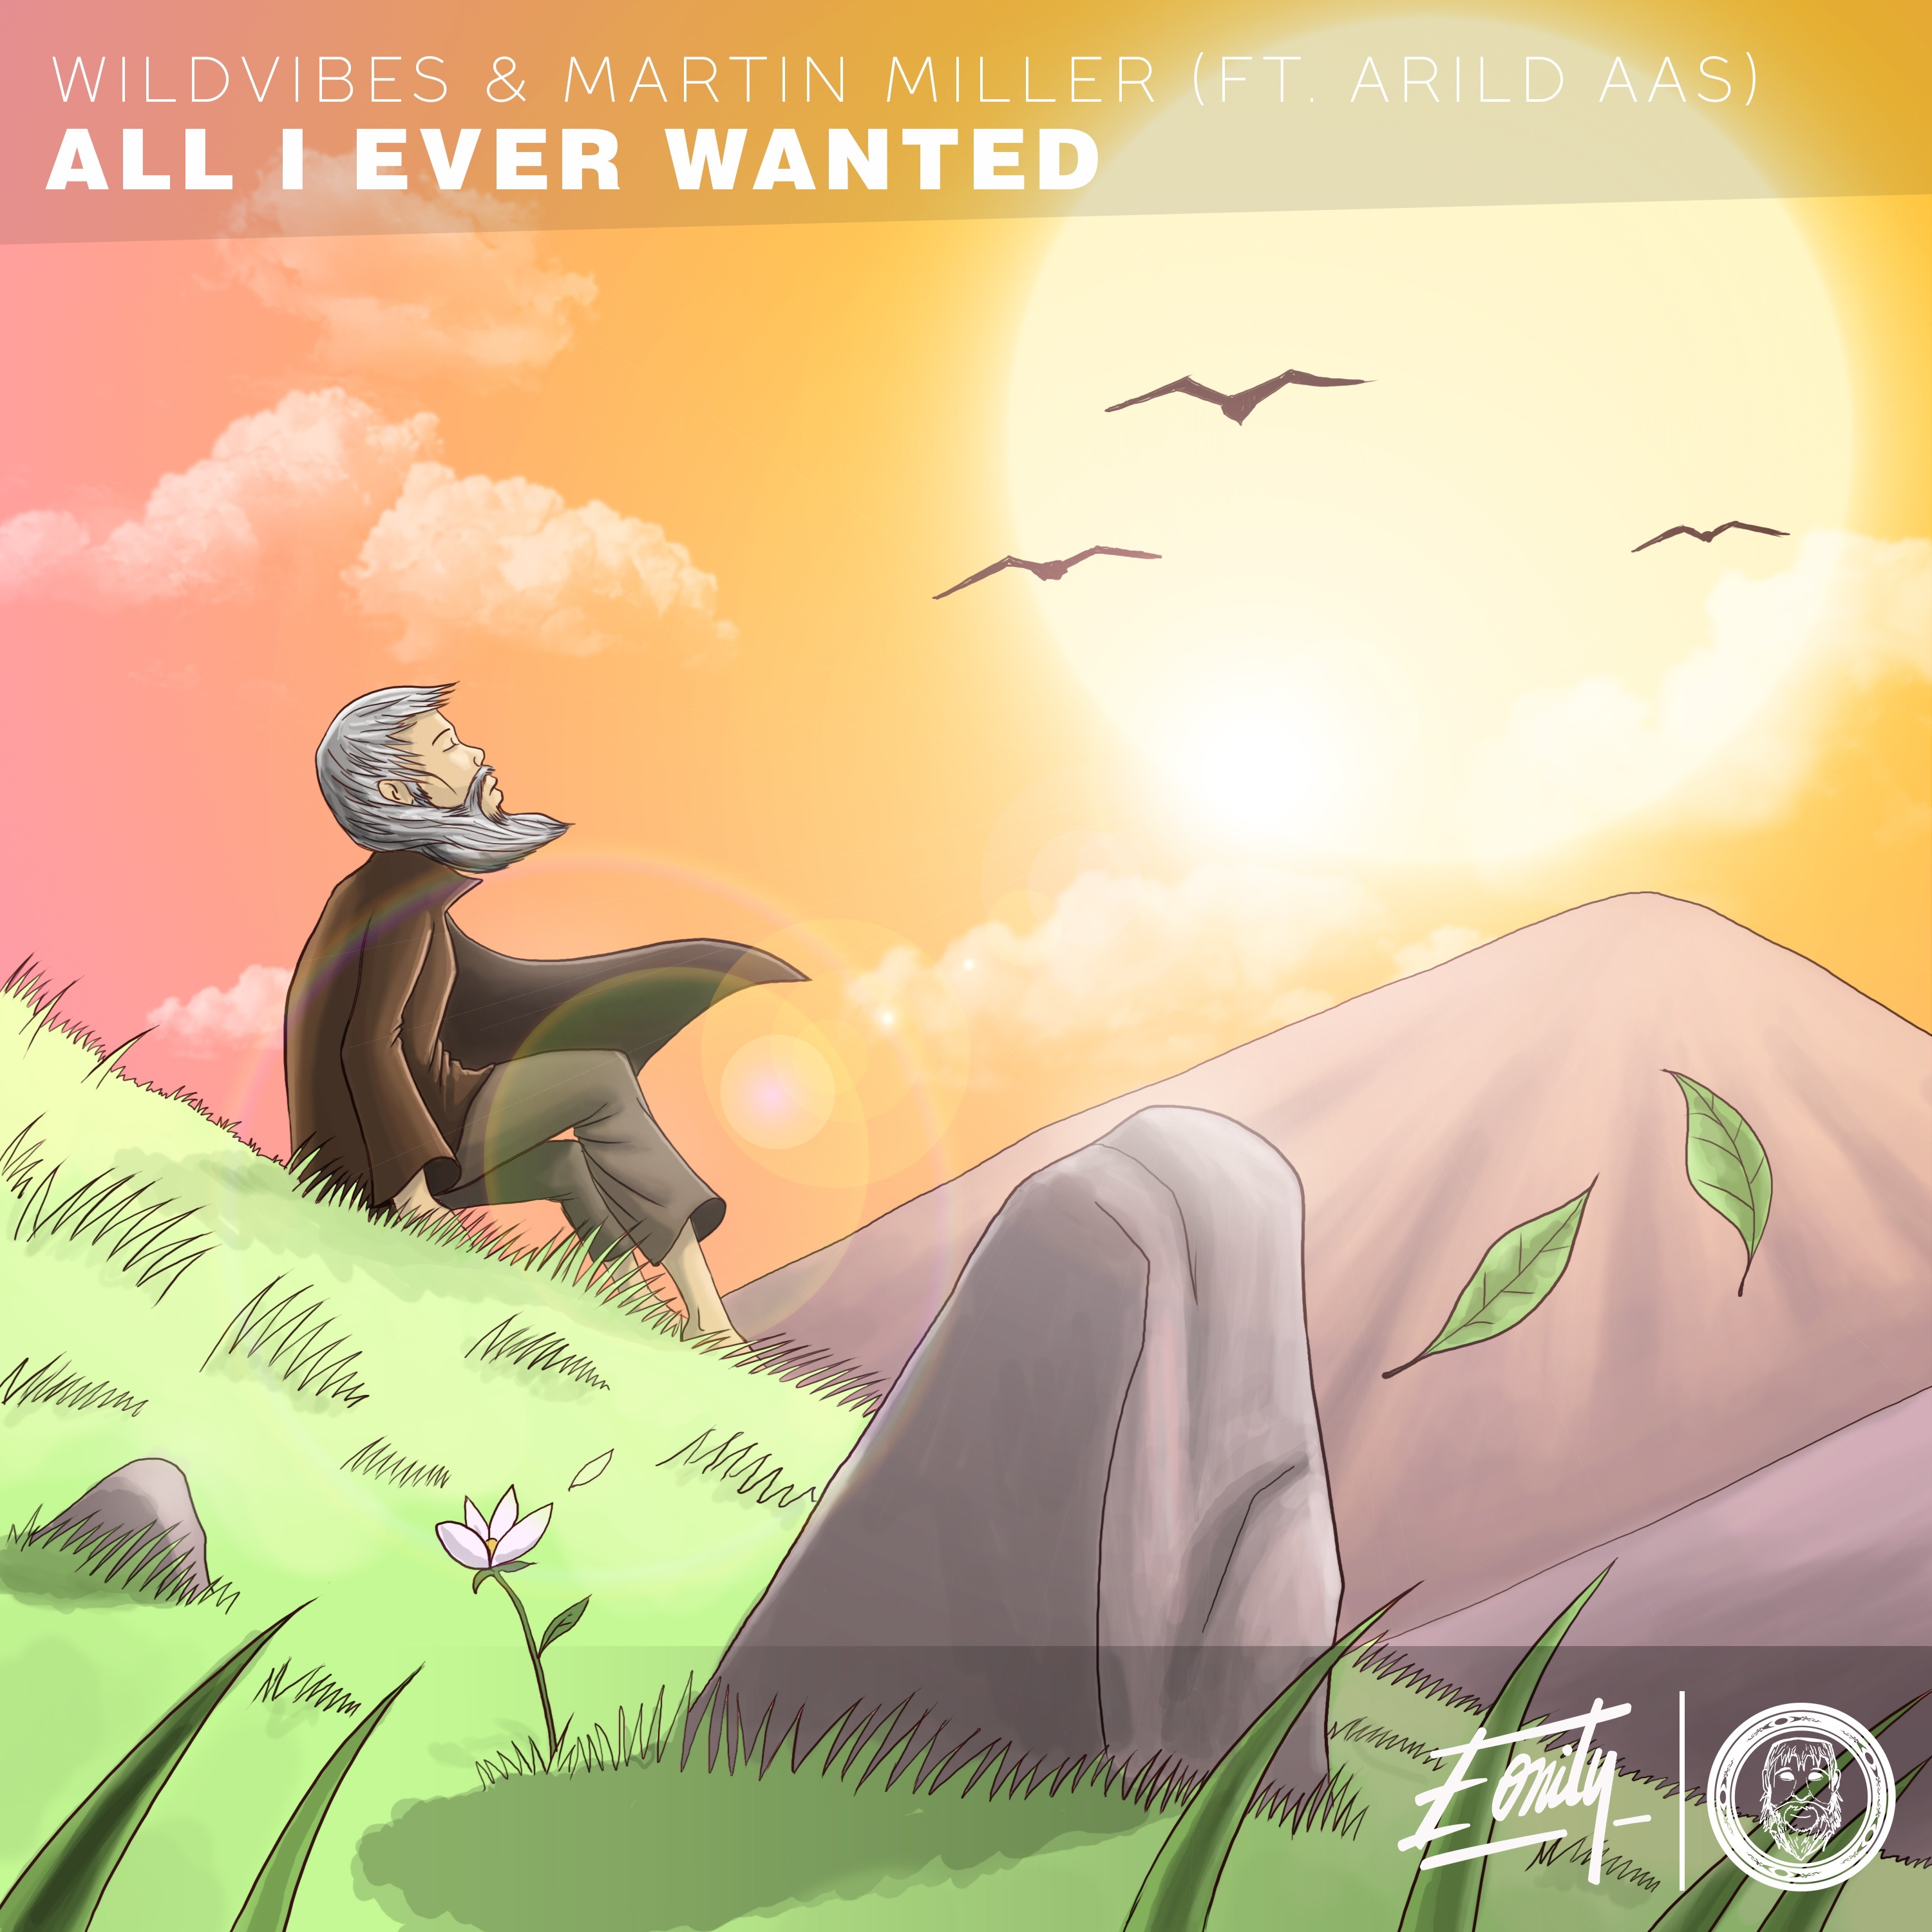 All I Ever Wanted歌词 歌手WildVibes / Martin Miller / Arild Aas-专辑All I Ever Wanted-单曲《All I Ever Wanted》LRC歌词下载